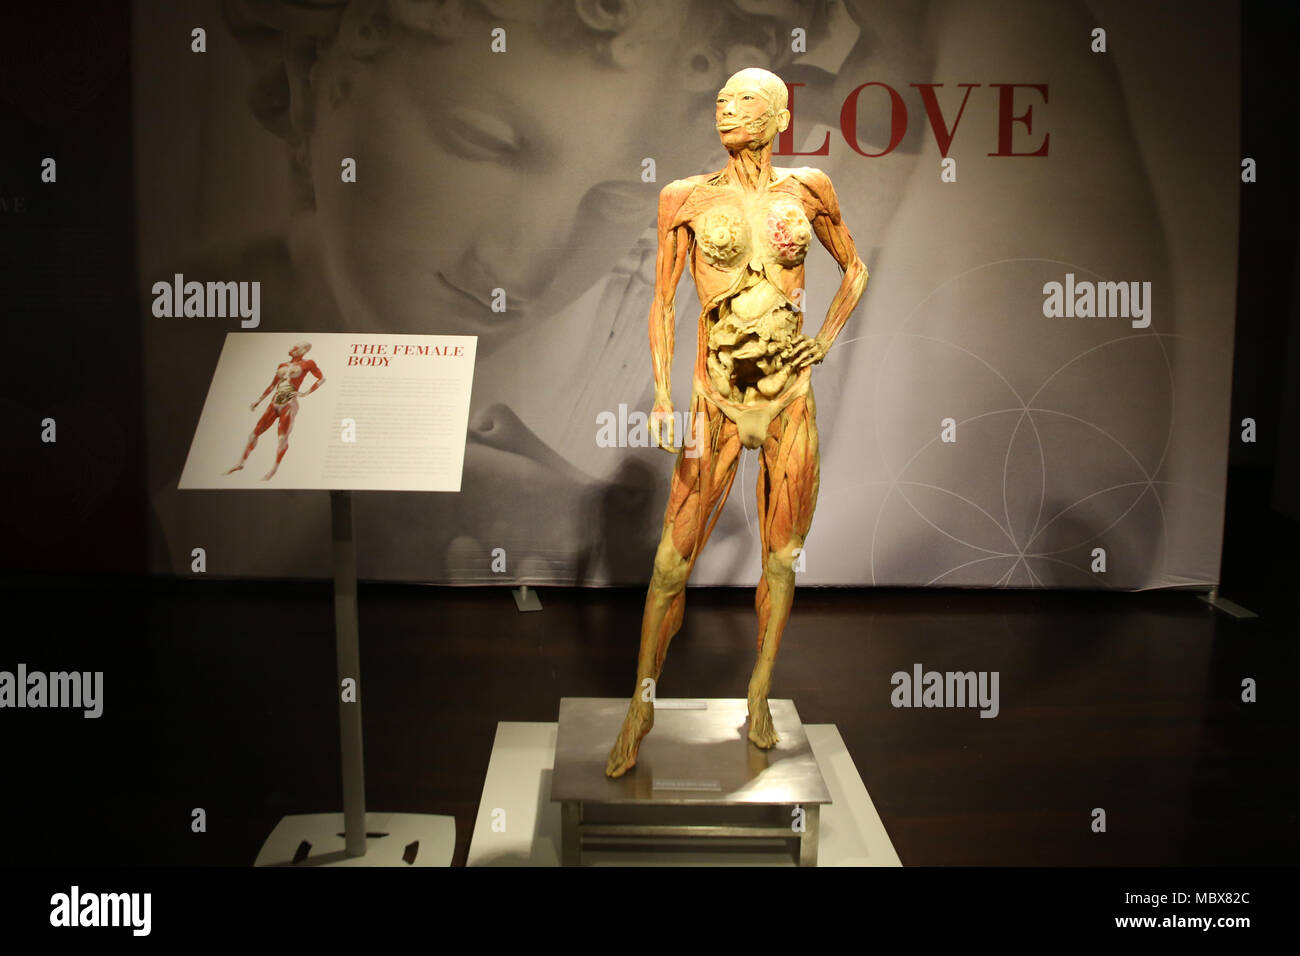 Sydney, Australia. 12 April 2018. What are we made of? Where do we come from? Why are we here? This exhibition explores the human body through physiology, culture and emotion. Real Bodies The Exhibition consists of 11 galleries with subject matter such as “Breathe” exploring the respiratory system, “Rhythm” revealing the delicate interconnectedness of the circulatory system, “Love” presenting the science of physical attraction, and more.  The exhibition pushes boundaries while seamlessly blending art, science, and emotion as a museum of the self. Credit: Richard Milnes/Alamy Live News Stock Photo